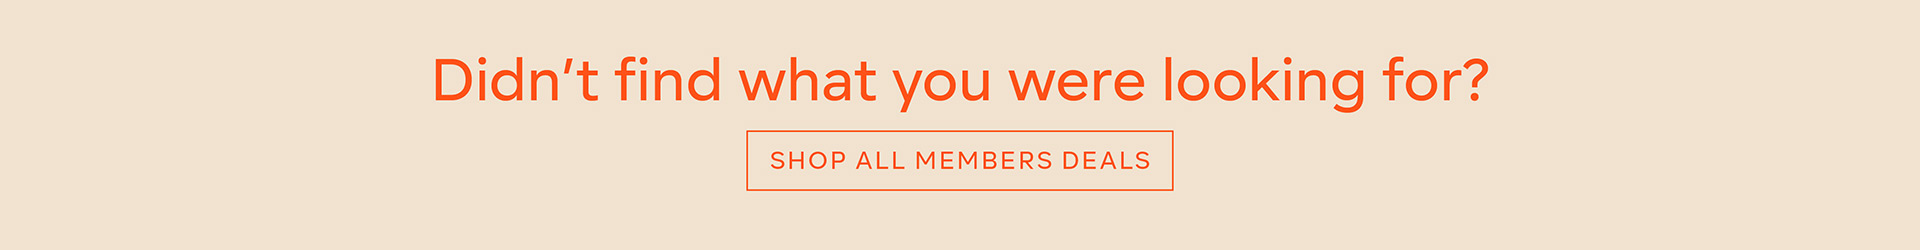 Didn't find what you were looking for? - SHOP ALL MEMBERS DEALS